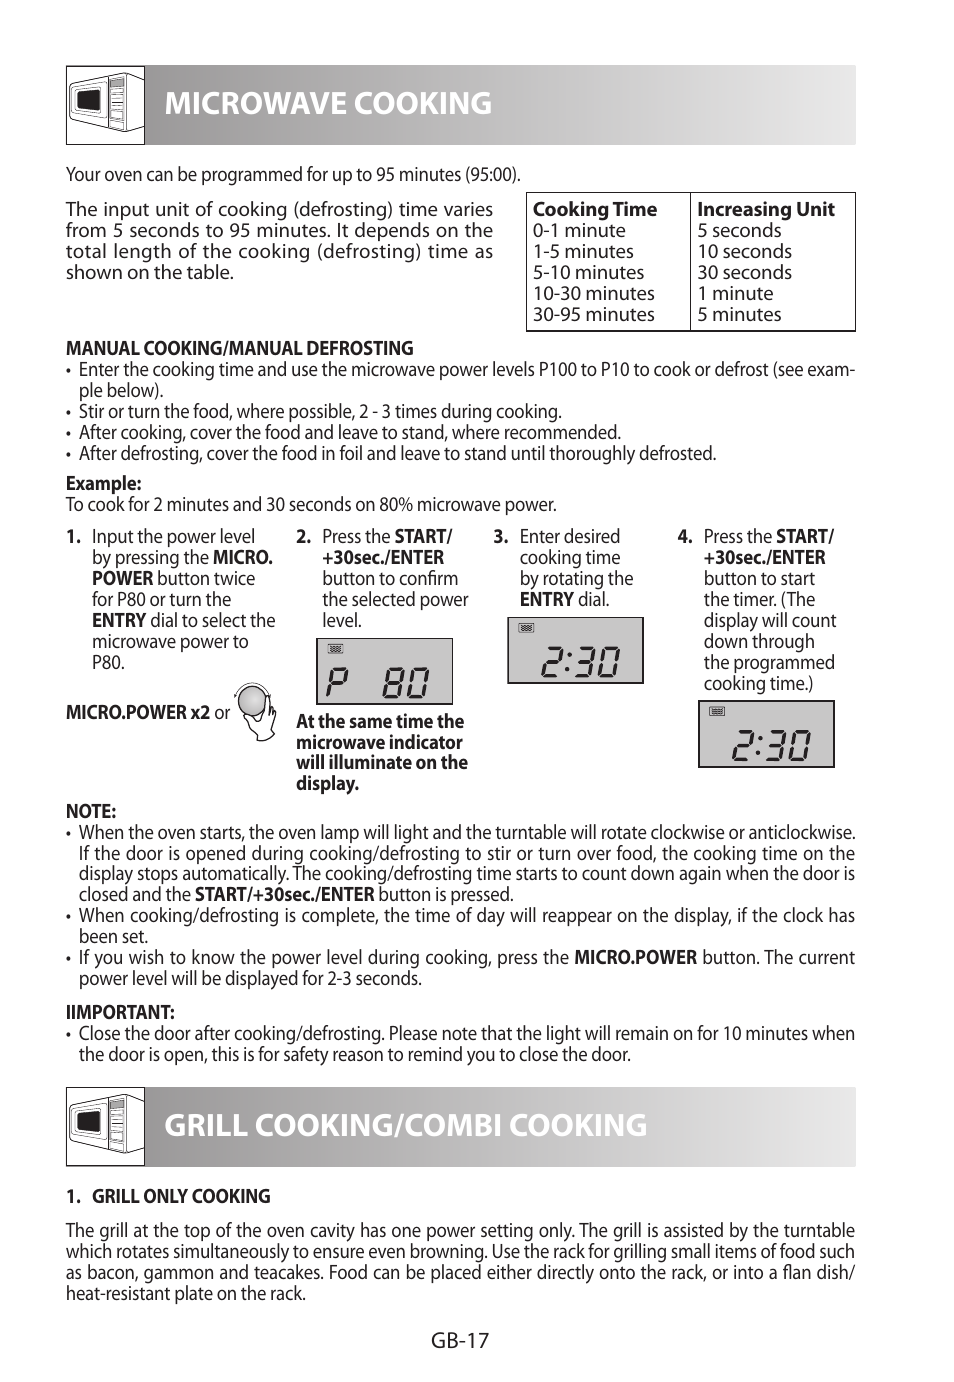 Microwave cooking, Grill cooking/combi cooking | Sharp R-982STWE User Manual | Page 254 / 266